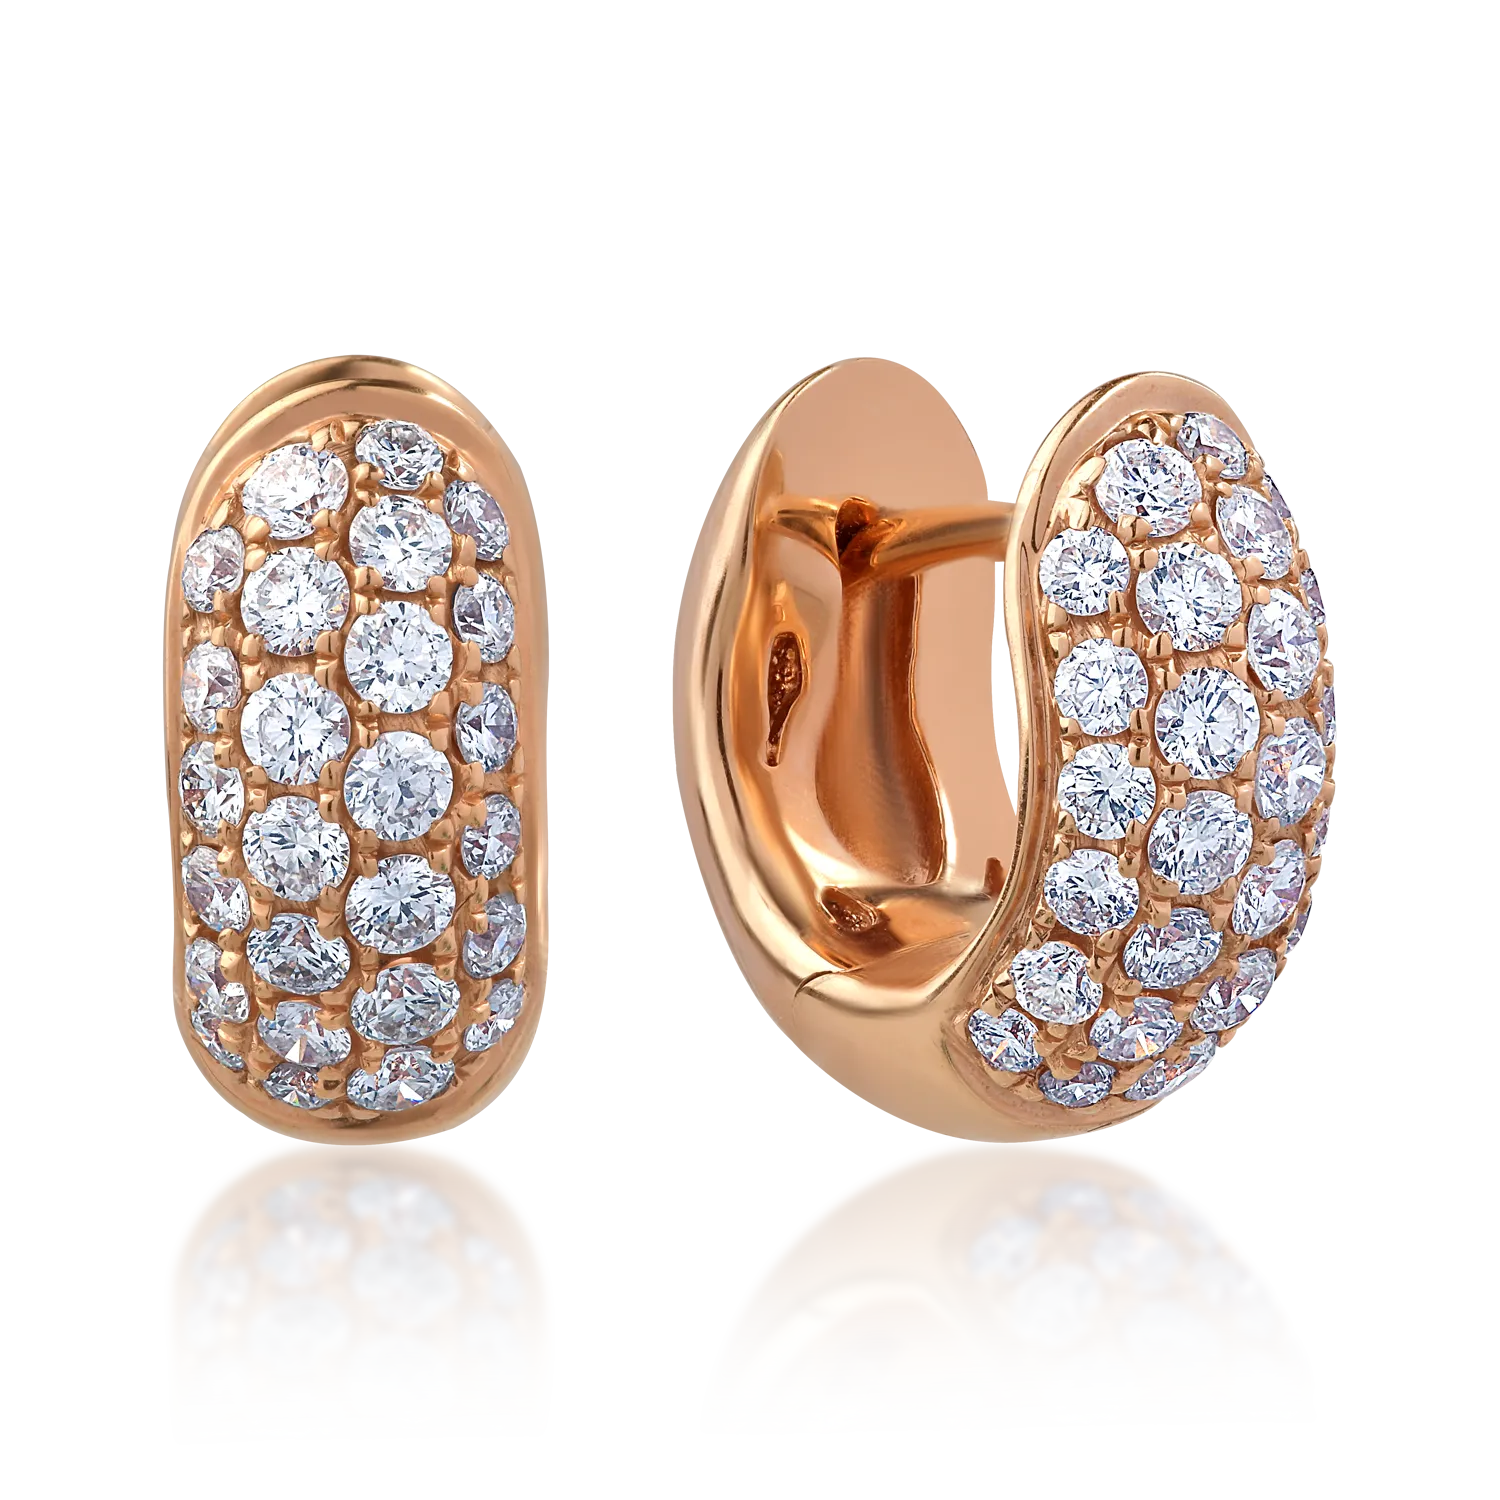 18K rose gold earrings with 0.48ct diamonds